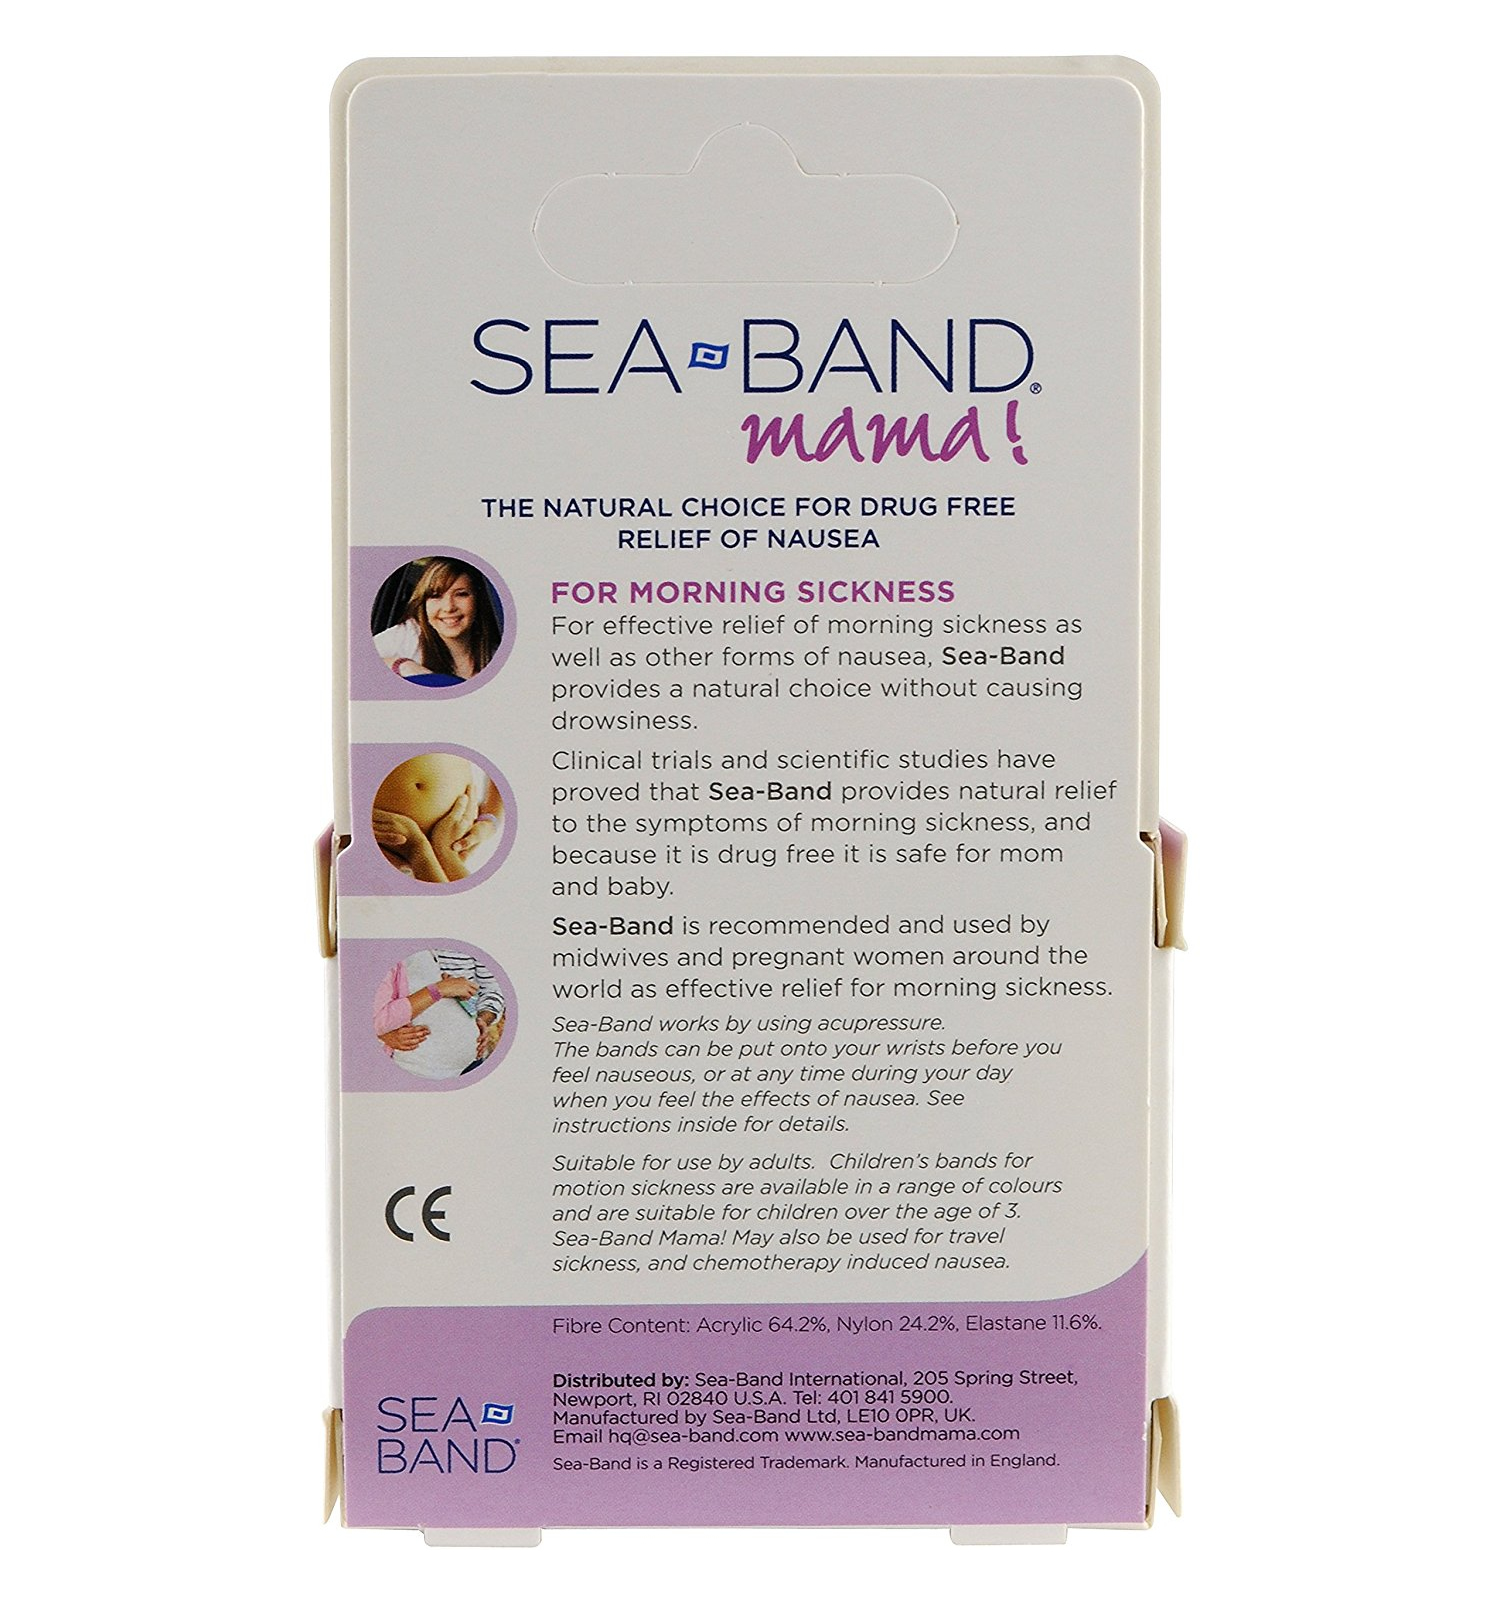 Acupressure Bracelet Against Nausea, Bracelets for Children Against Motion  Sickness, for Seasickness, Pregnancy, Flying, Travel Sickness without Side  Effects, Ideal for Children, Adults, Holidays and : Amazon.de: Health &  Personal Care